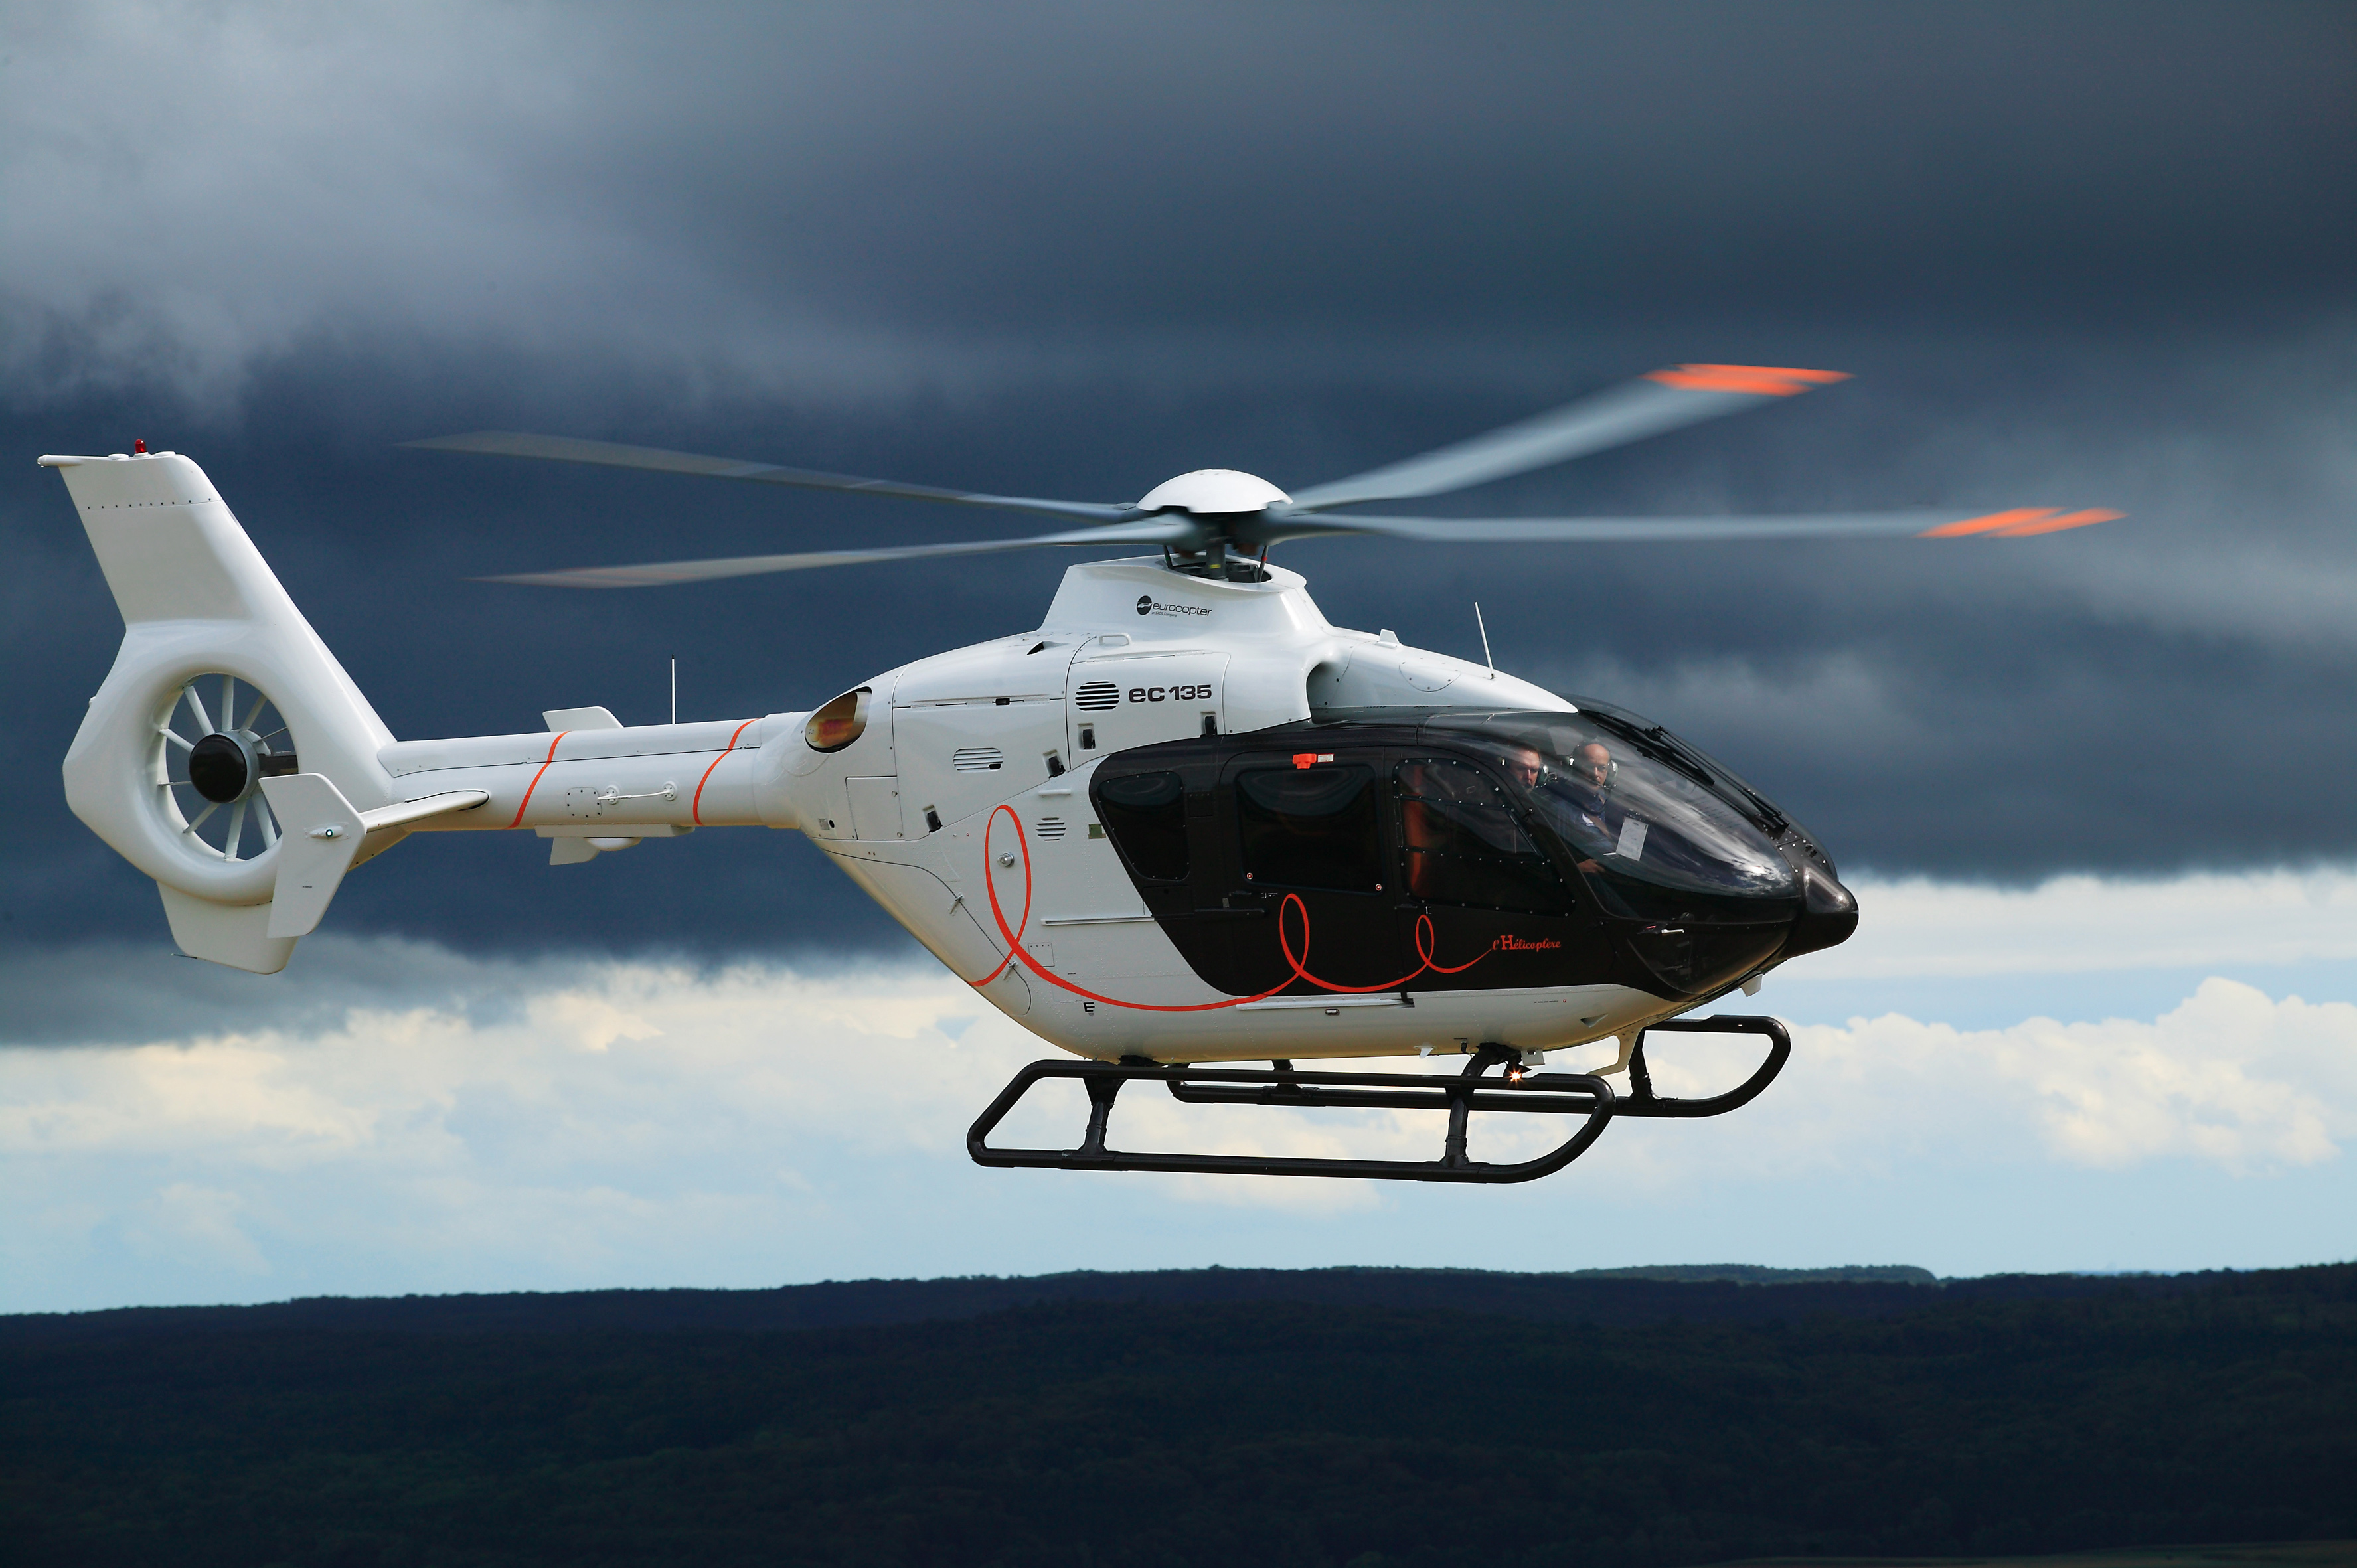 Helicopter High Resolution Wallpaper Eurocopter